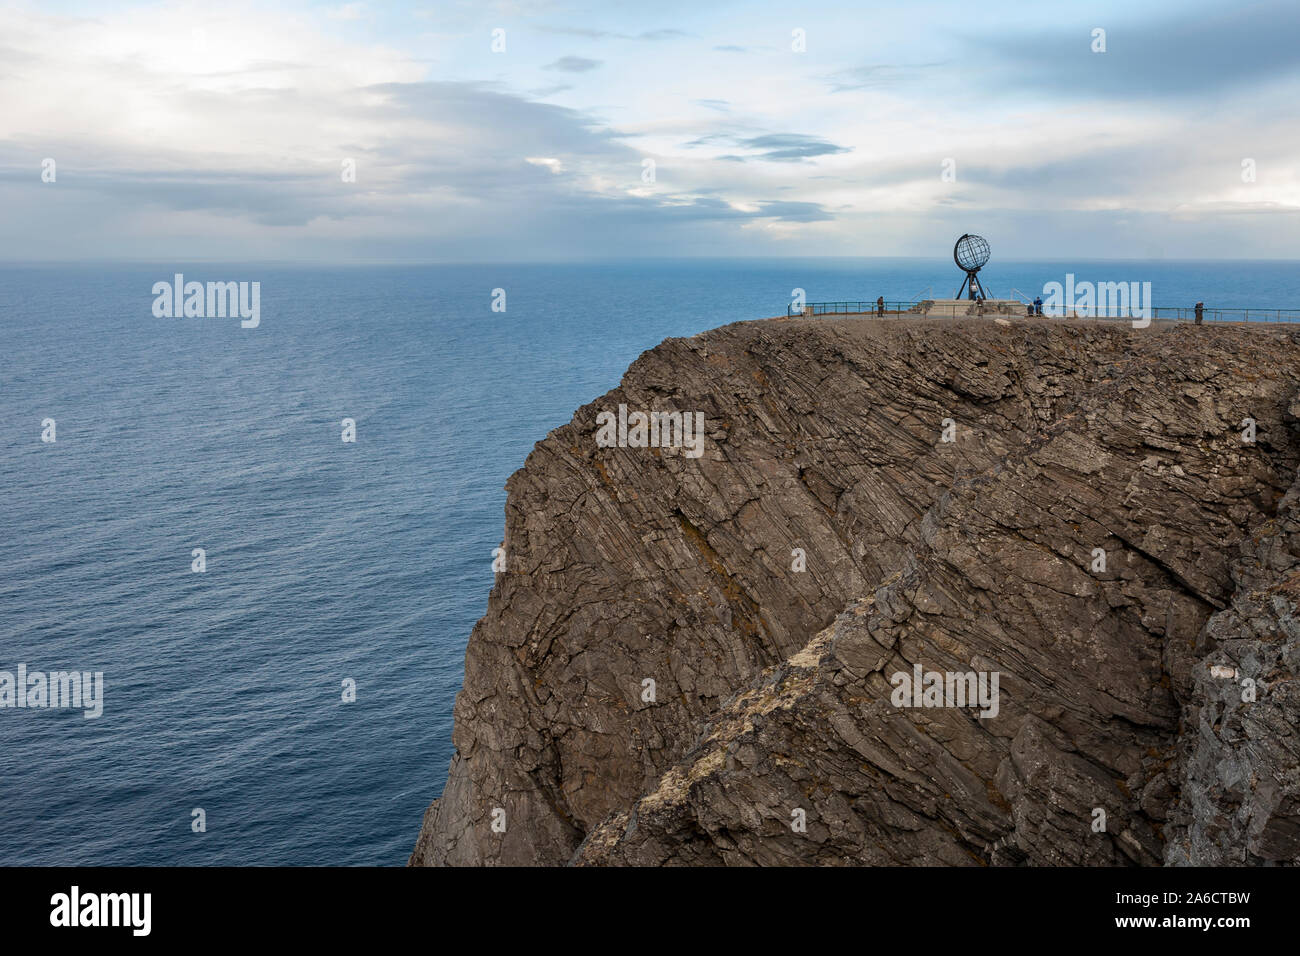 The Nordkapp (North Cape) Globe Monument, Magerøya, Finnmark, Northern Norway, perched on the iconic headland above the Barents Sea Stock Photo